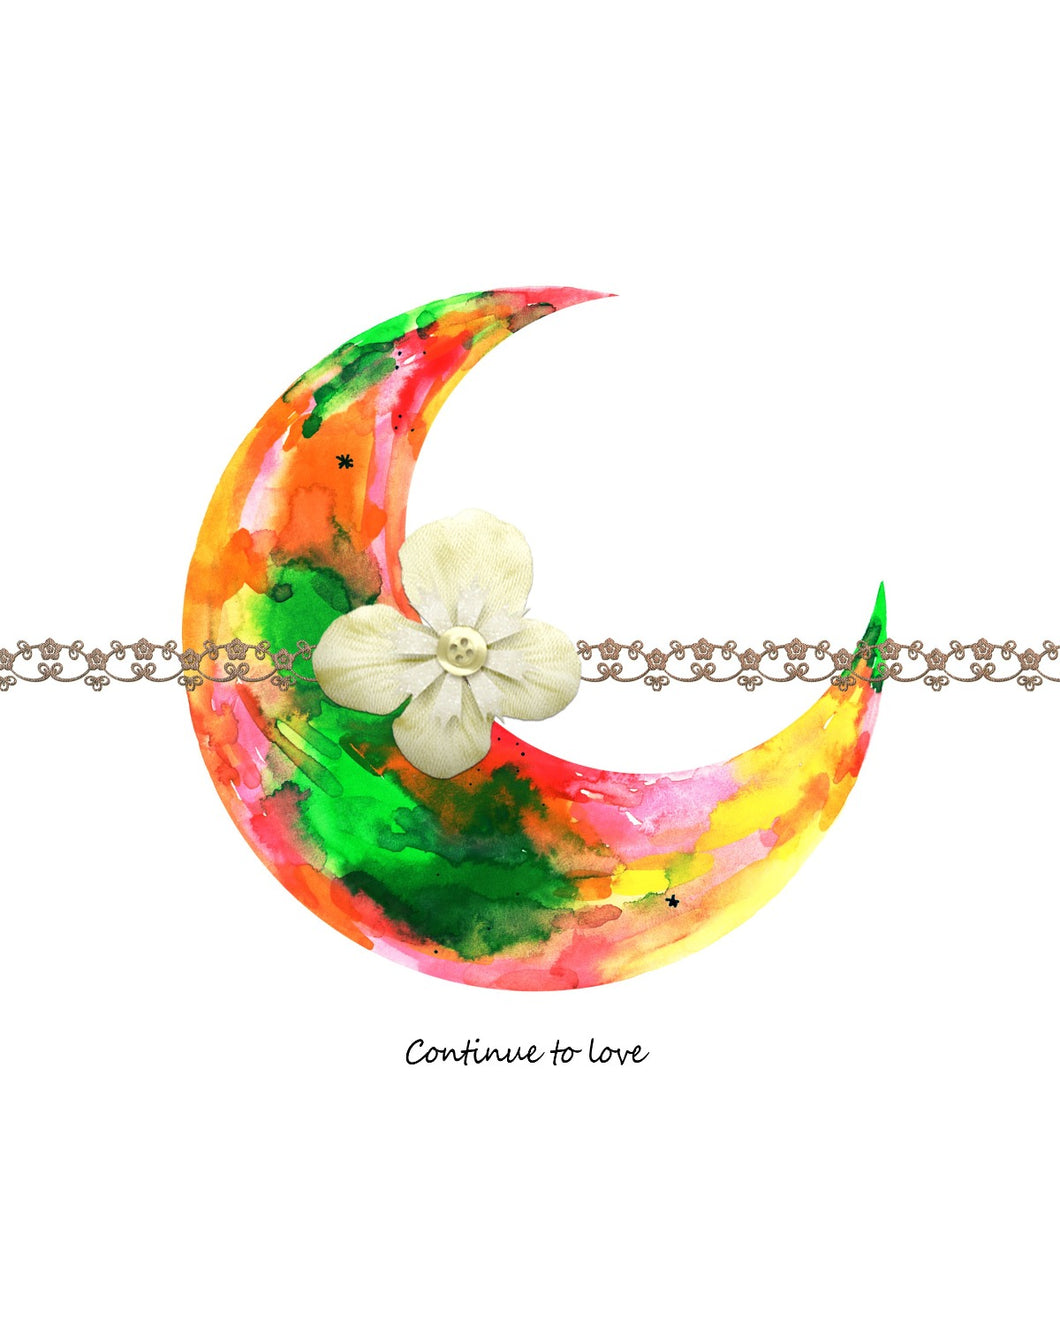 Eco-Friendly Abstract Colorful Planet Prints at Jellyque | Represents Sustainability Through Rainbow Crescent Moon | Bright Green & Soda Orange Colors Brighten Up Your Day | Endearing Vibe | Reusable Material: Cotton Flowers & Beige Lace Collage Design By Graphic | Instant Download | Sustainable Living Gift Ideas